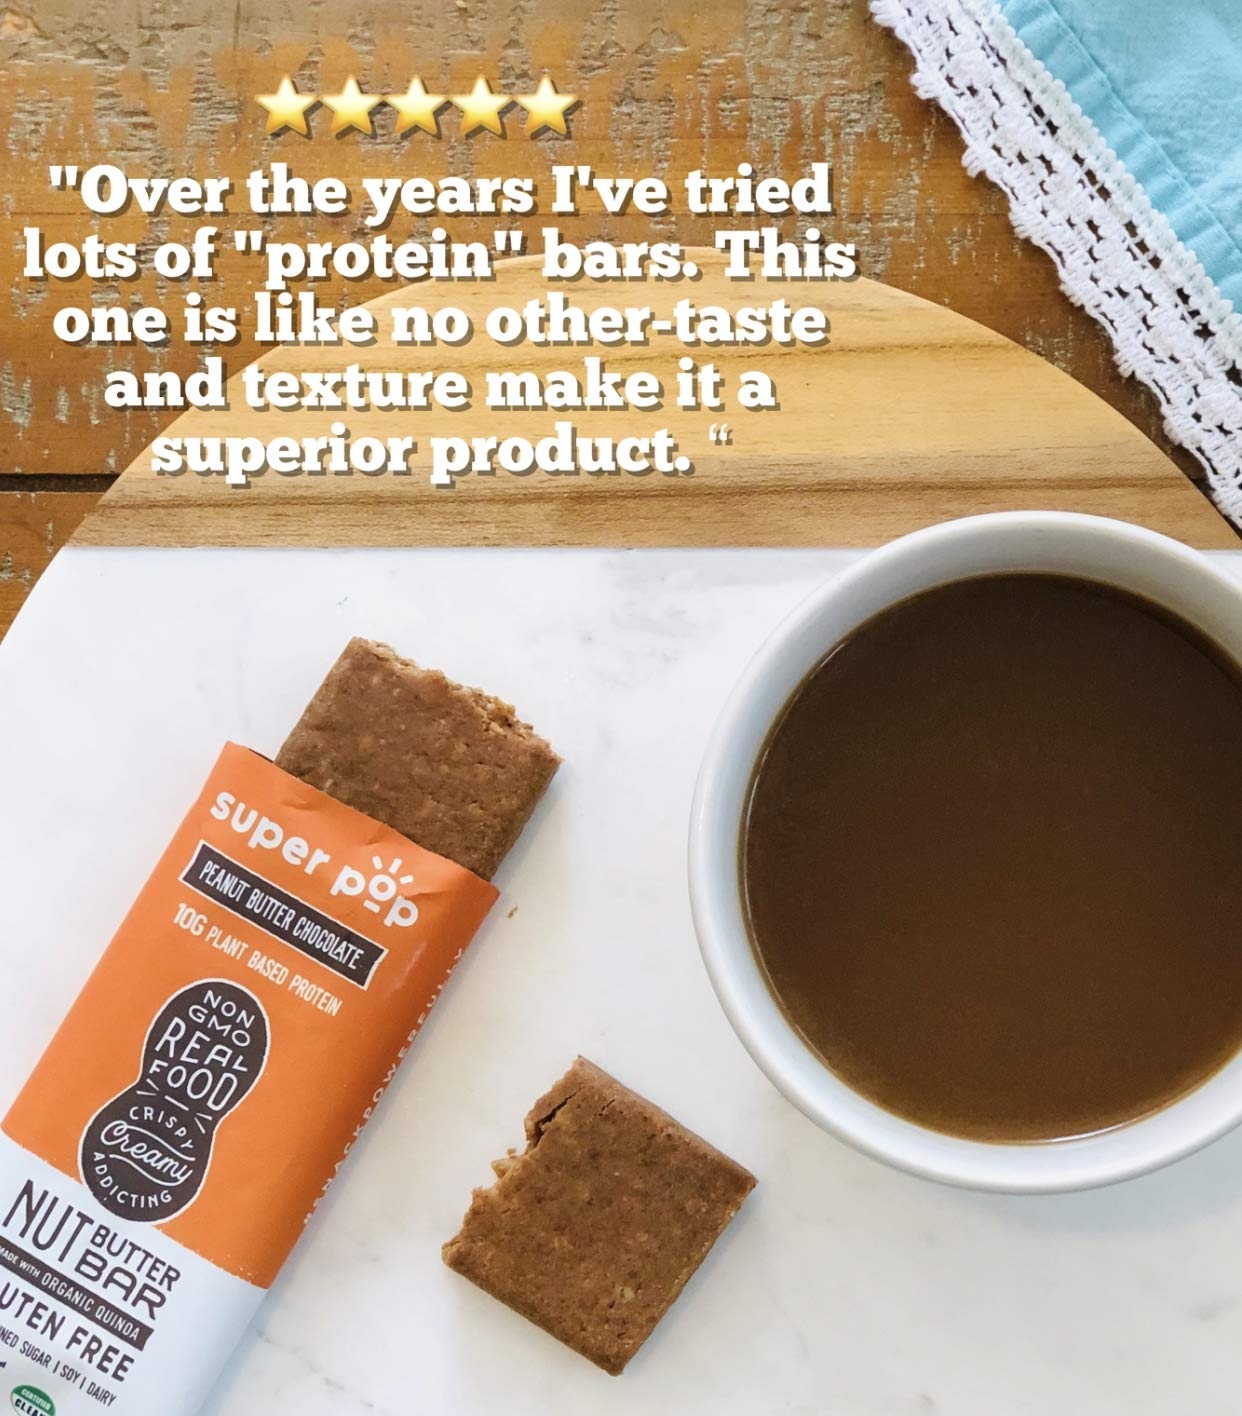 Super Pop Snacks Plant Based Protein Bar, Peanut Butter Chocolate, Made with Performance Nut Butter and Whole Foods, Vegan Friendly Ingredients, Dairy Free, Keto Friendly, 10g of Protein, 12 pack